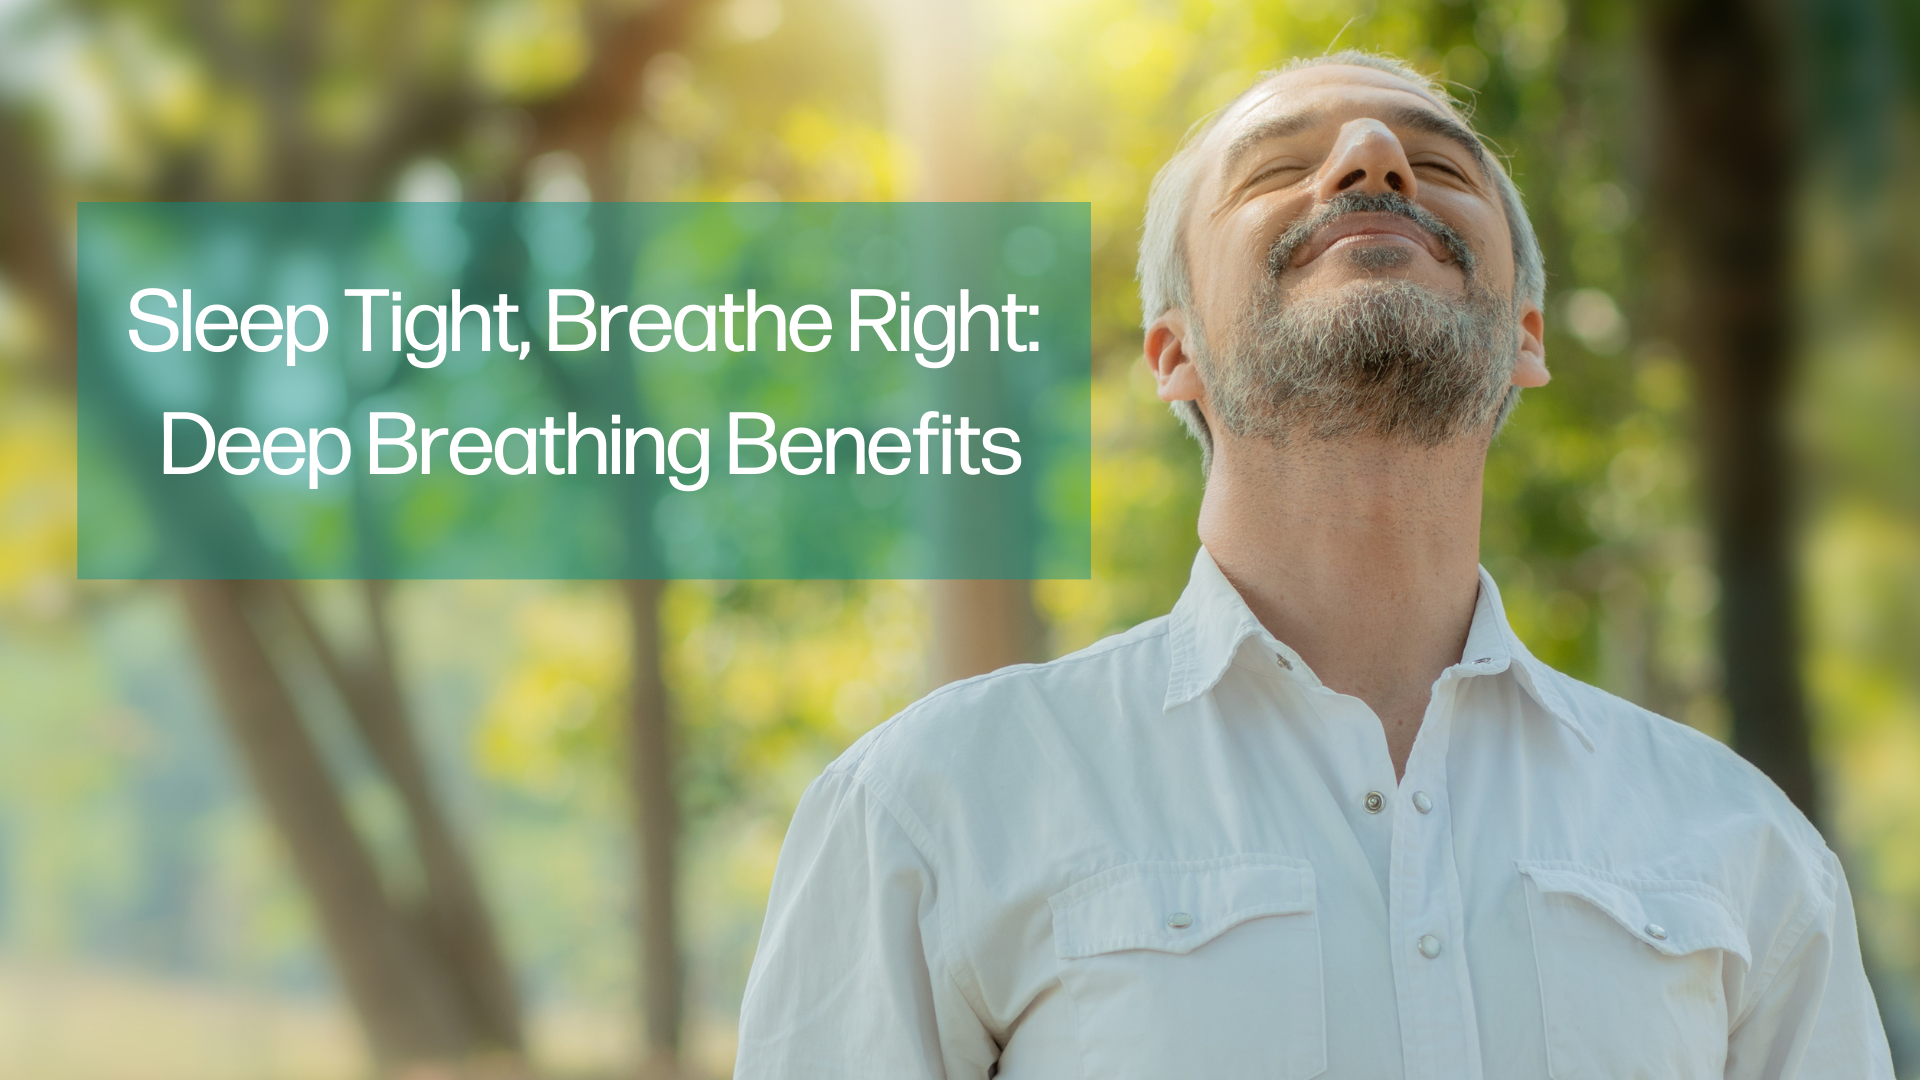 Reduce Stress and Improve Sleep Quality – Benefits Of Deep Breathing & How To Practice It